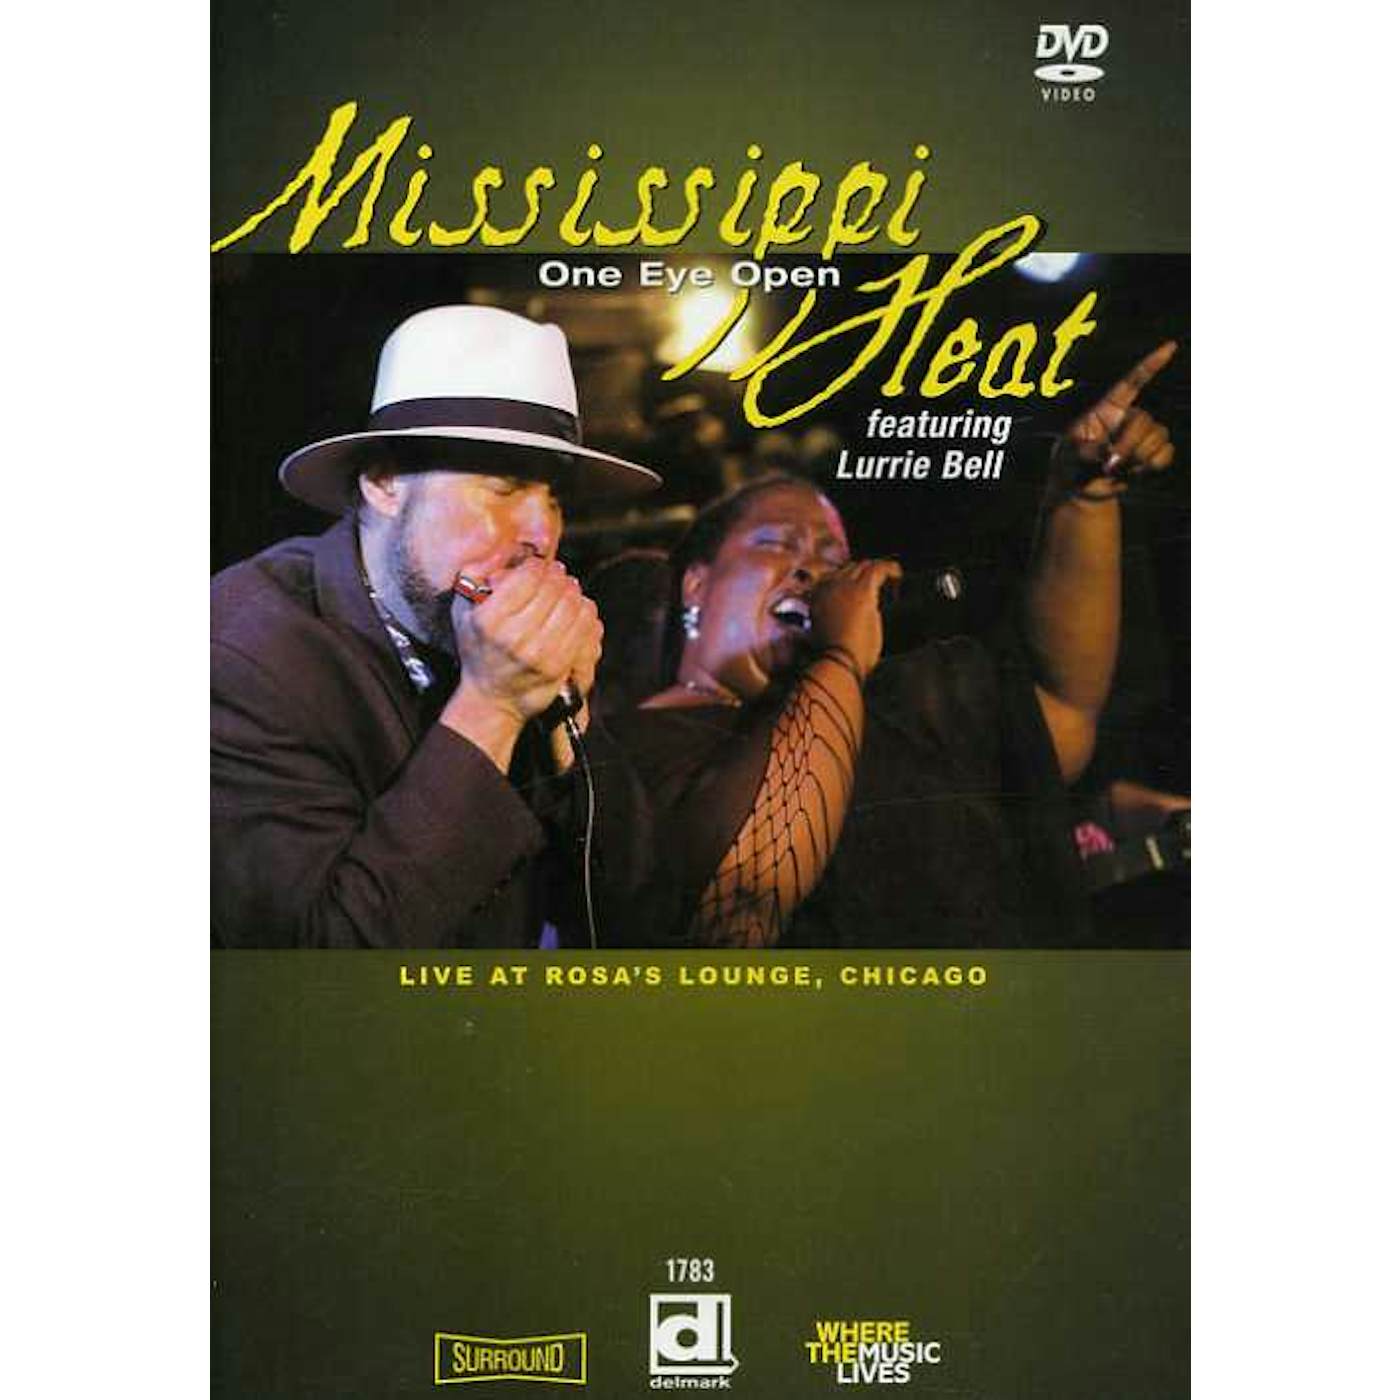 Mississippi Heat ONE EYE OPEN: LIVE AT ROSA'S LOUNGE CHICAGO DVD